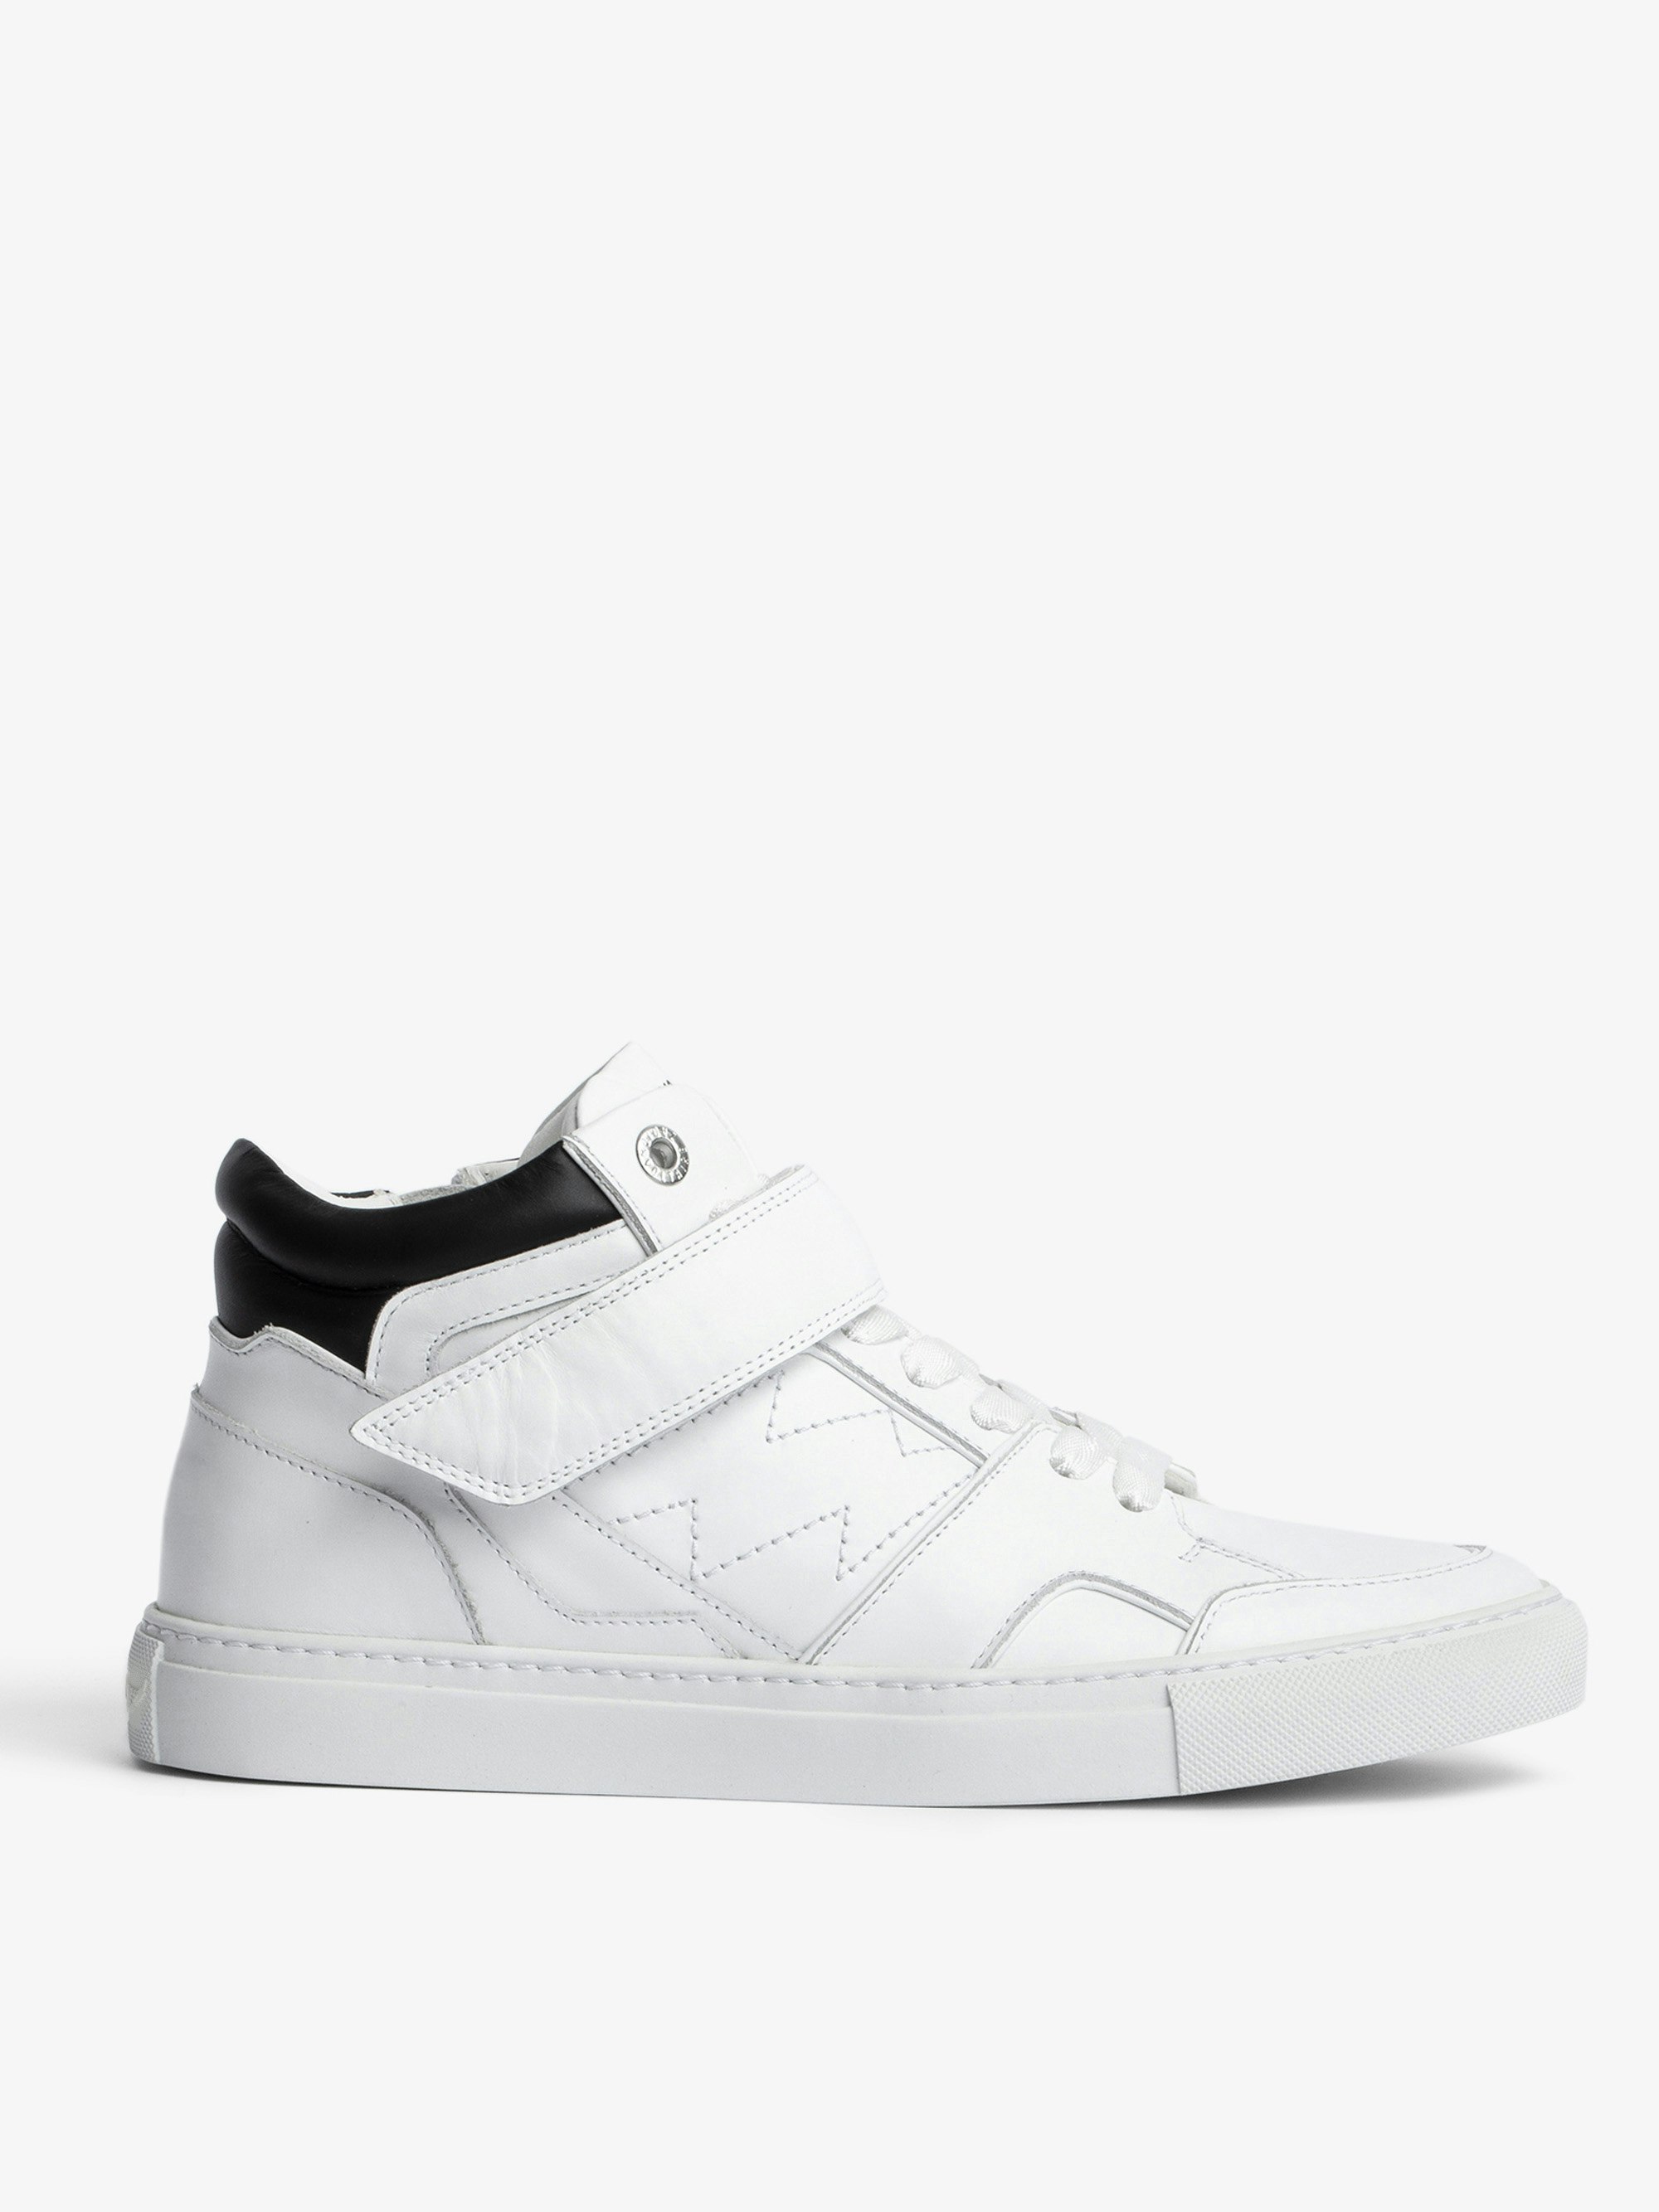 ZV1747 Mid Flash Sneakers - Women’s white leather mid-top sneakers